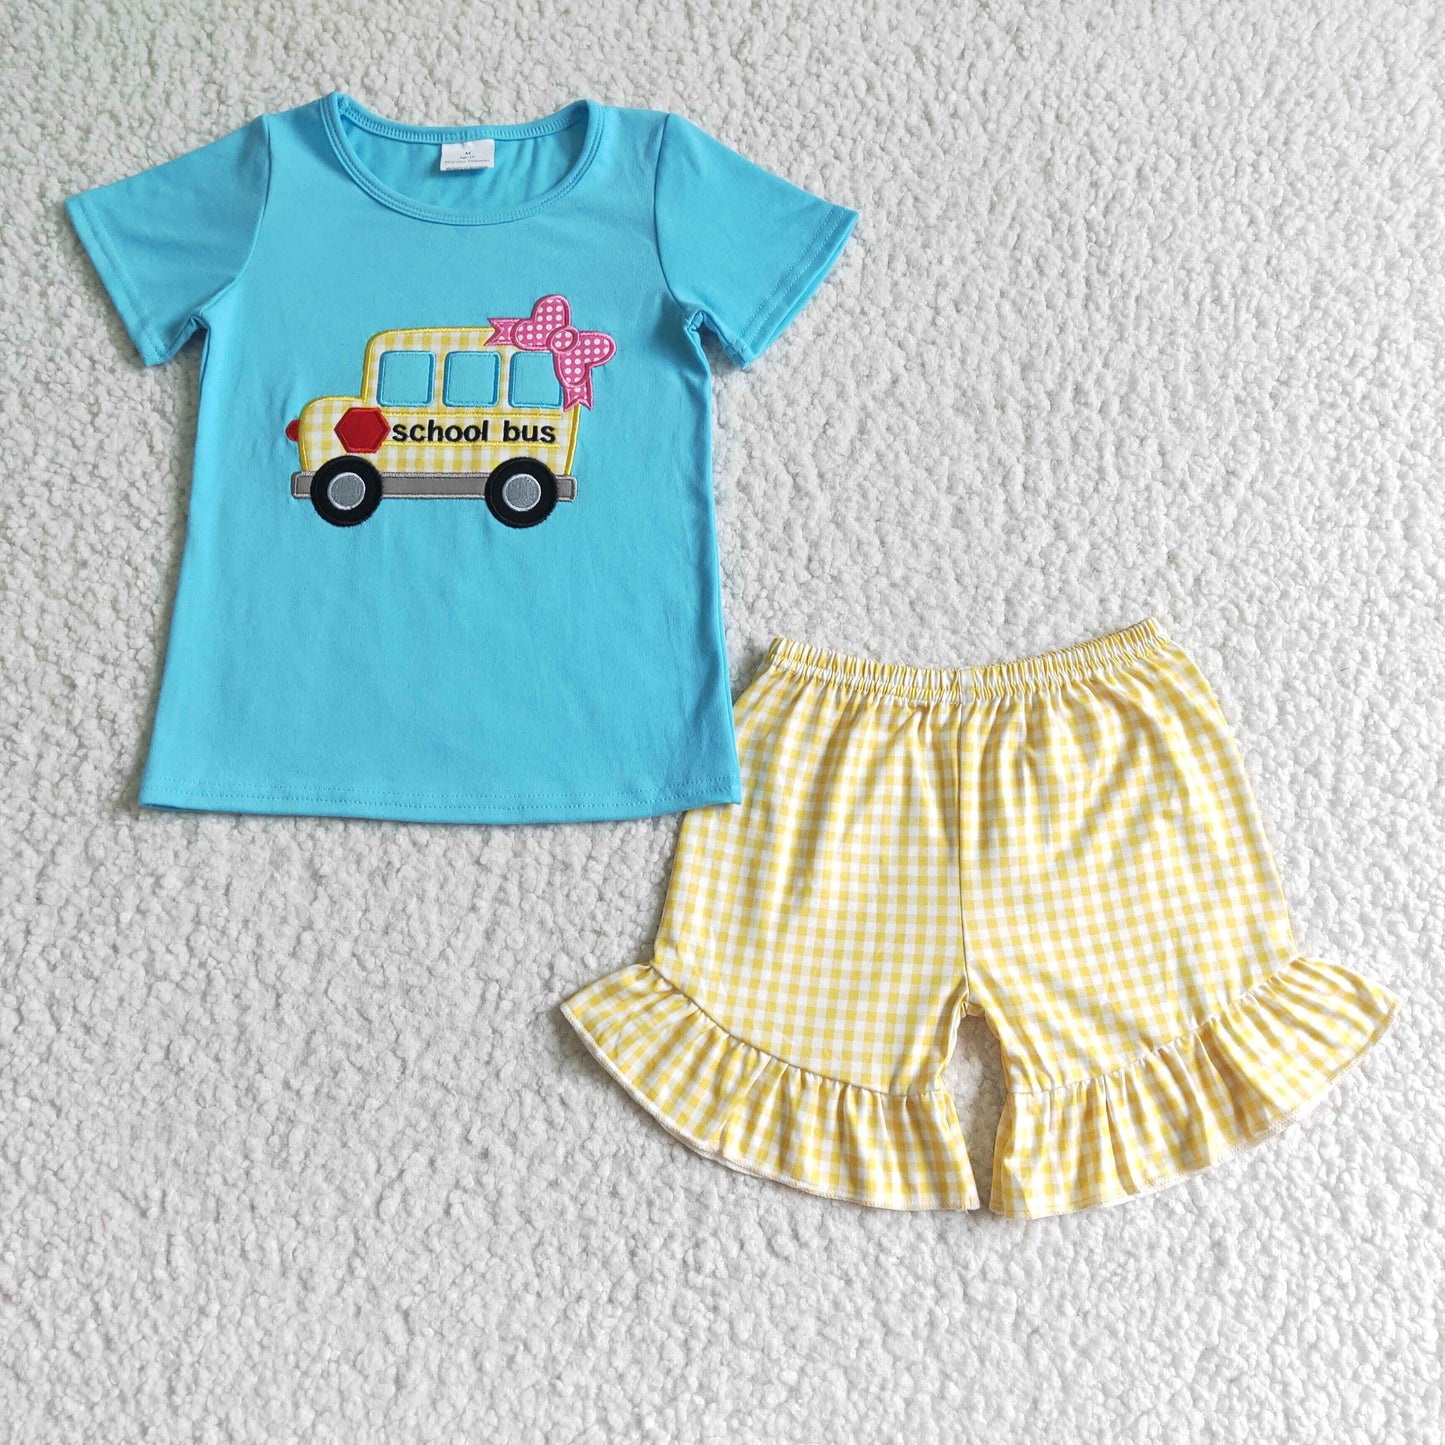 student back to school clothes girl school bus embroidery cotton top and plaids shorts set